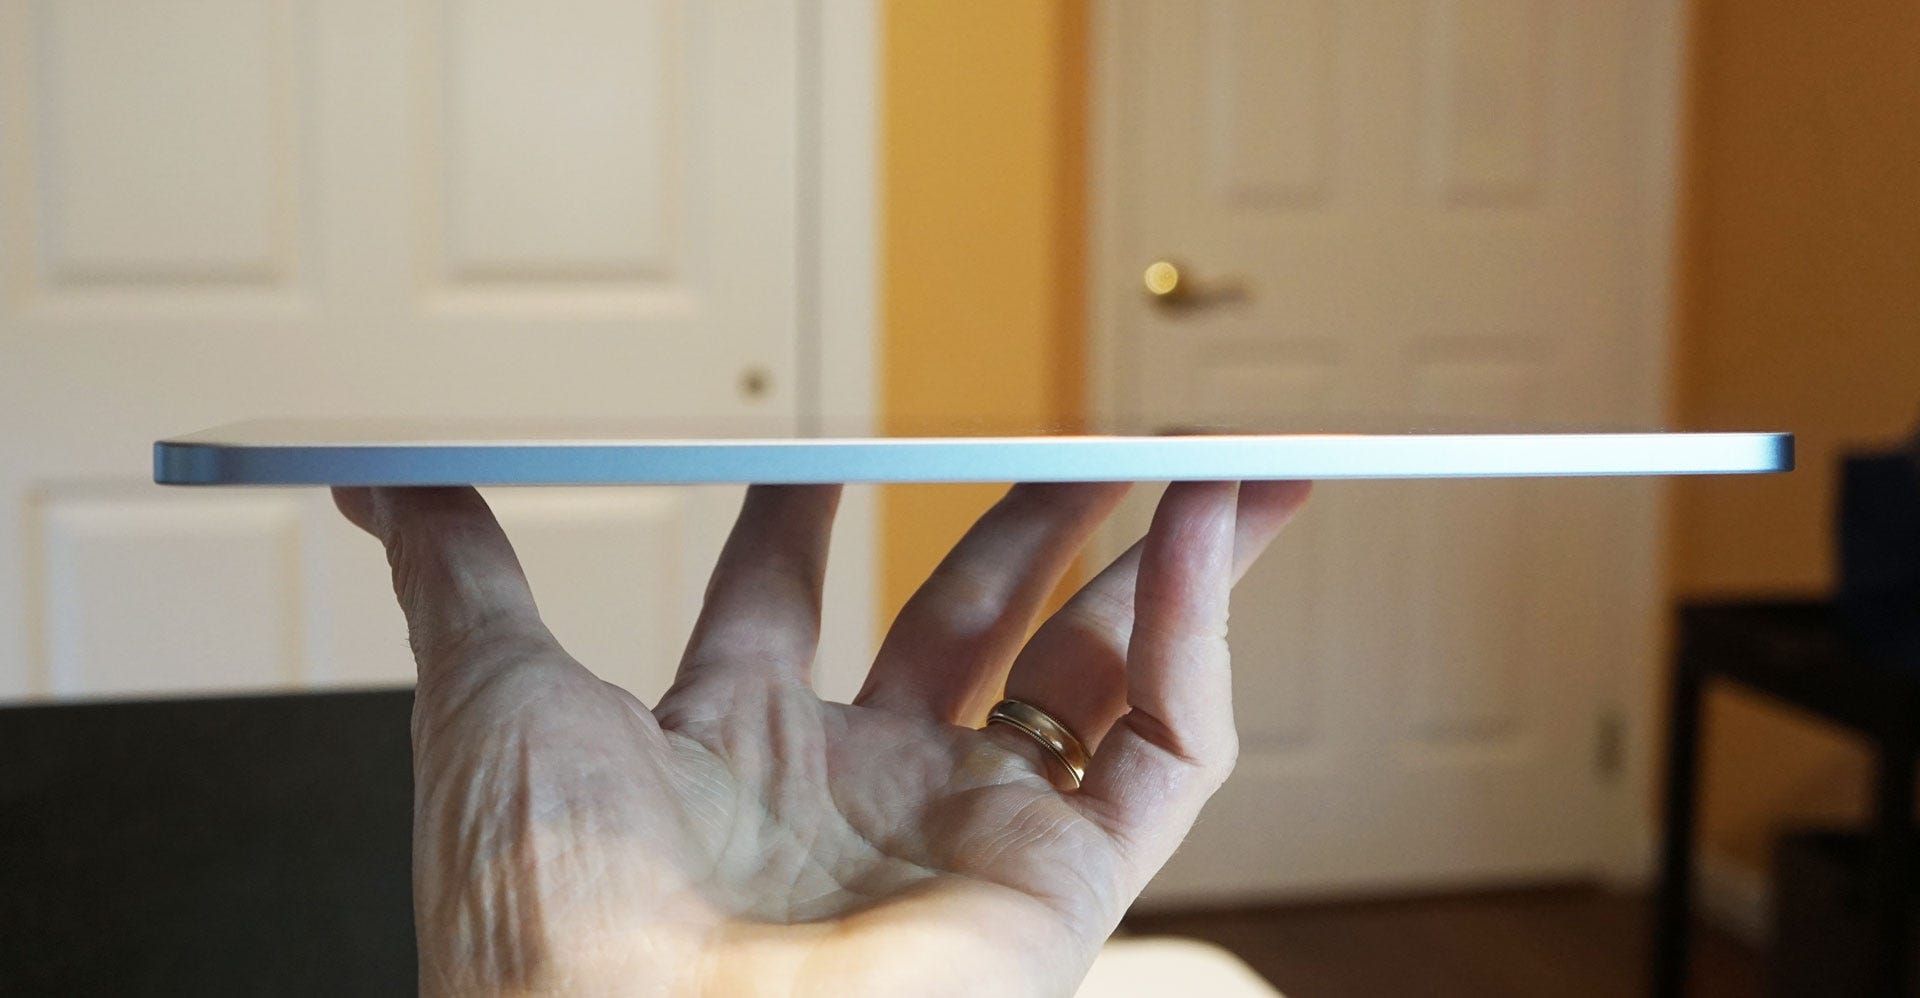 Apple iPad Air Is an Excellent, Do Everything Tablet